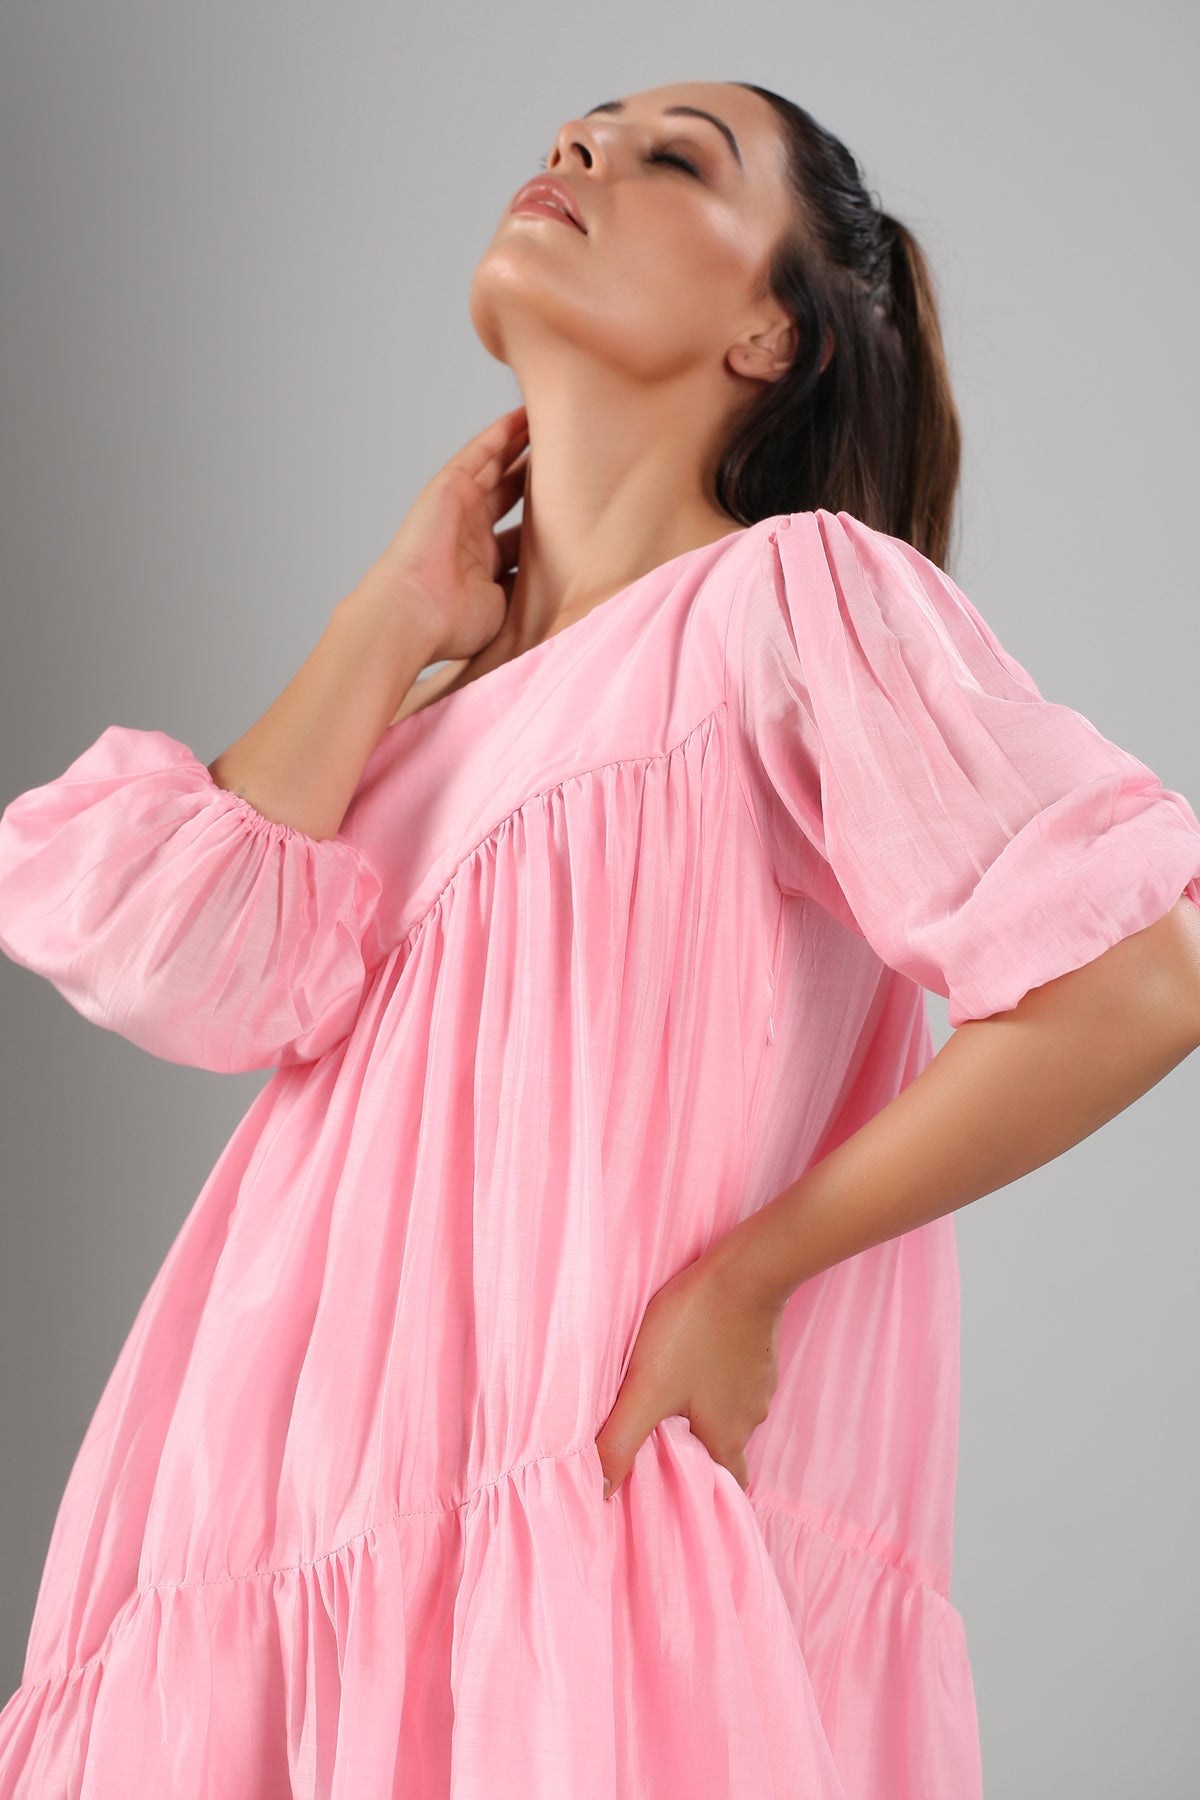 Pink Off Shoulder Dress at Kamakhyaa by MOH-The Eternal Dhaga. This item is Casual Wear, Cotton, Moh-The eternal Dhaga, Natural, Off-Shoulder Dresses, Pink, Relaxed Fit, Solids, Womenswear